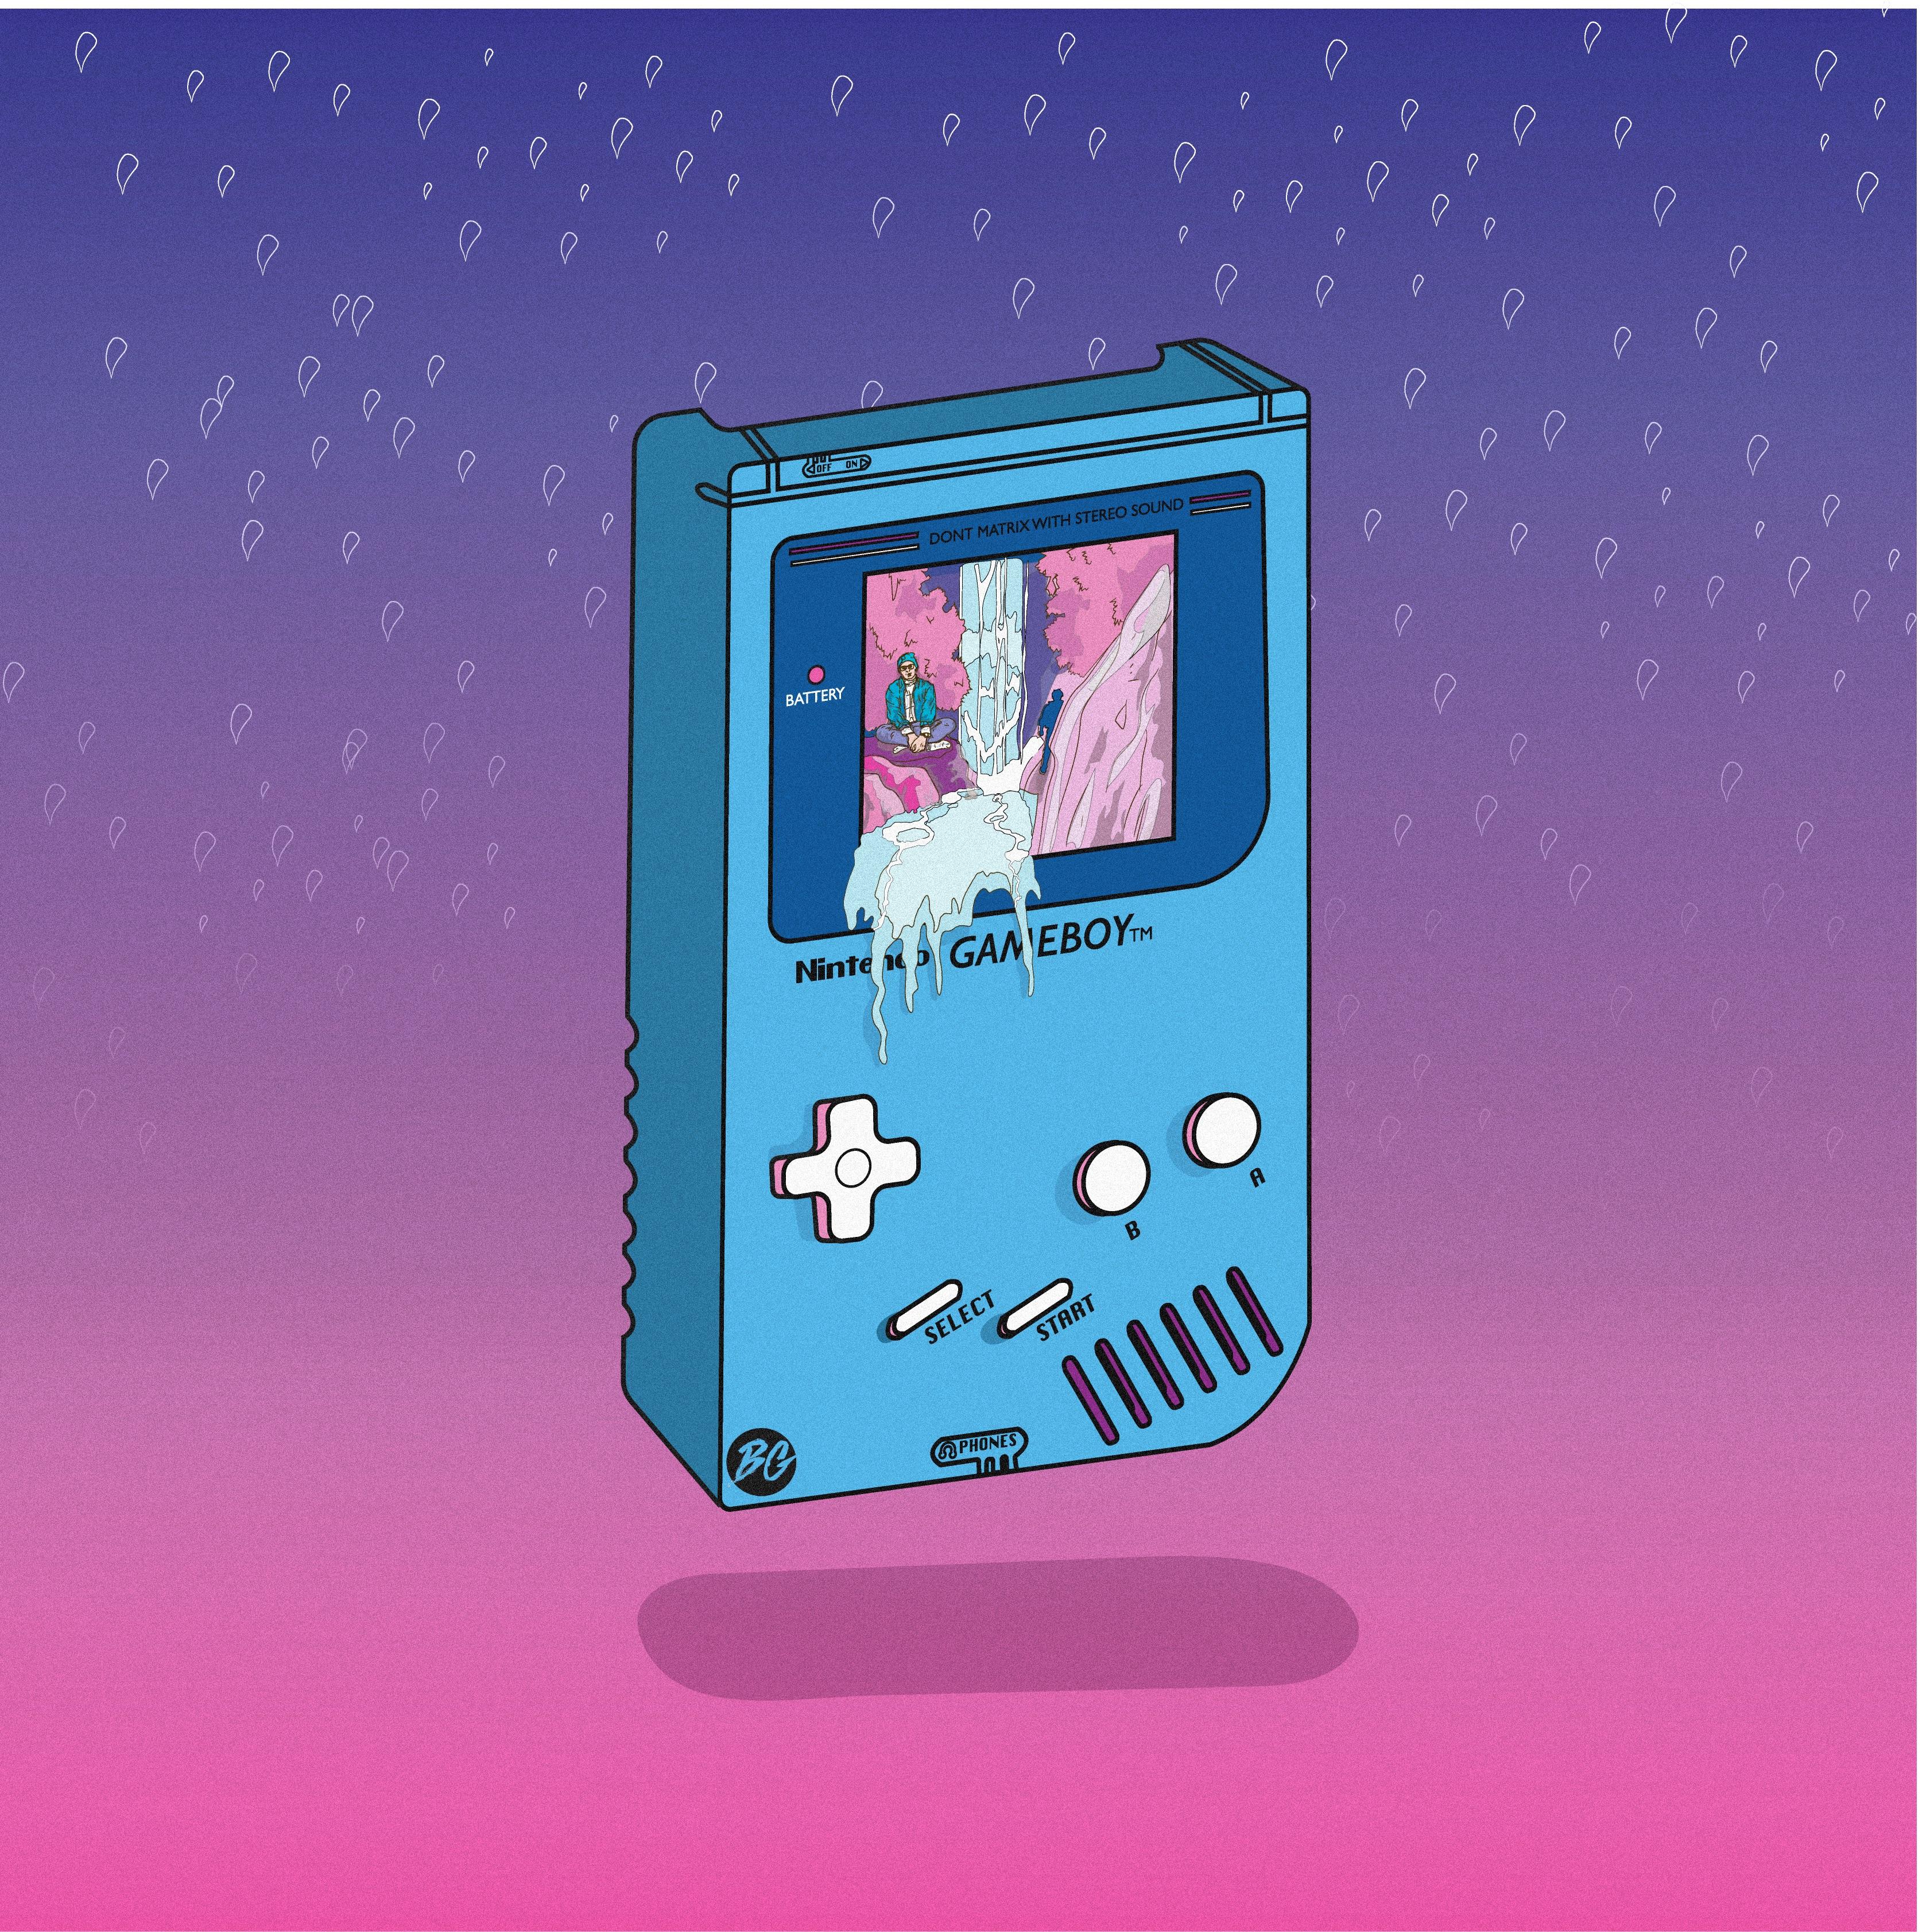 A Gameboy with a dripping anime girl on the screen - Game Boy